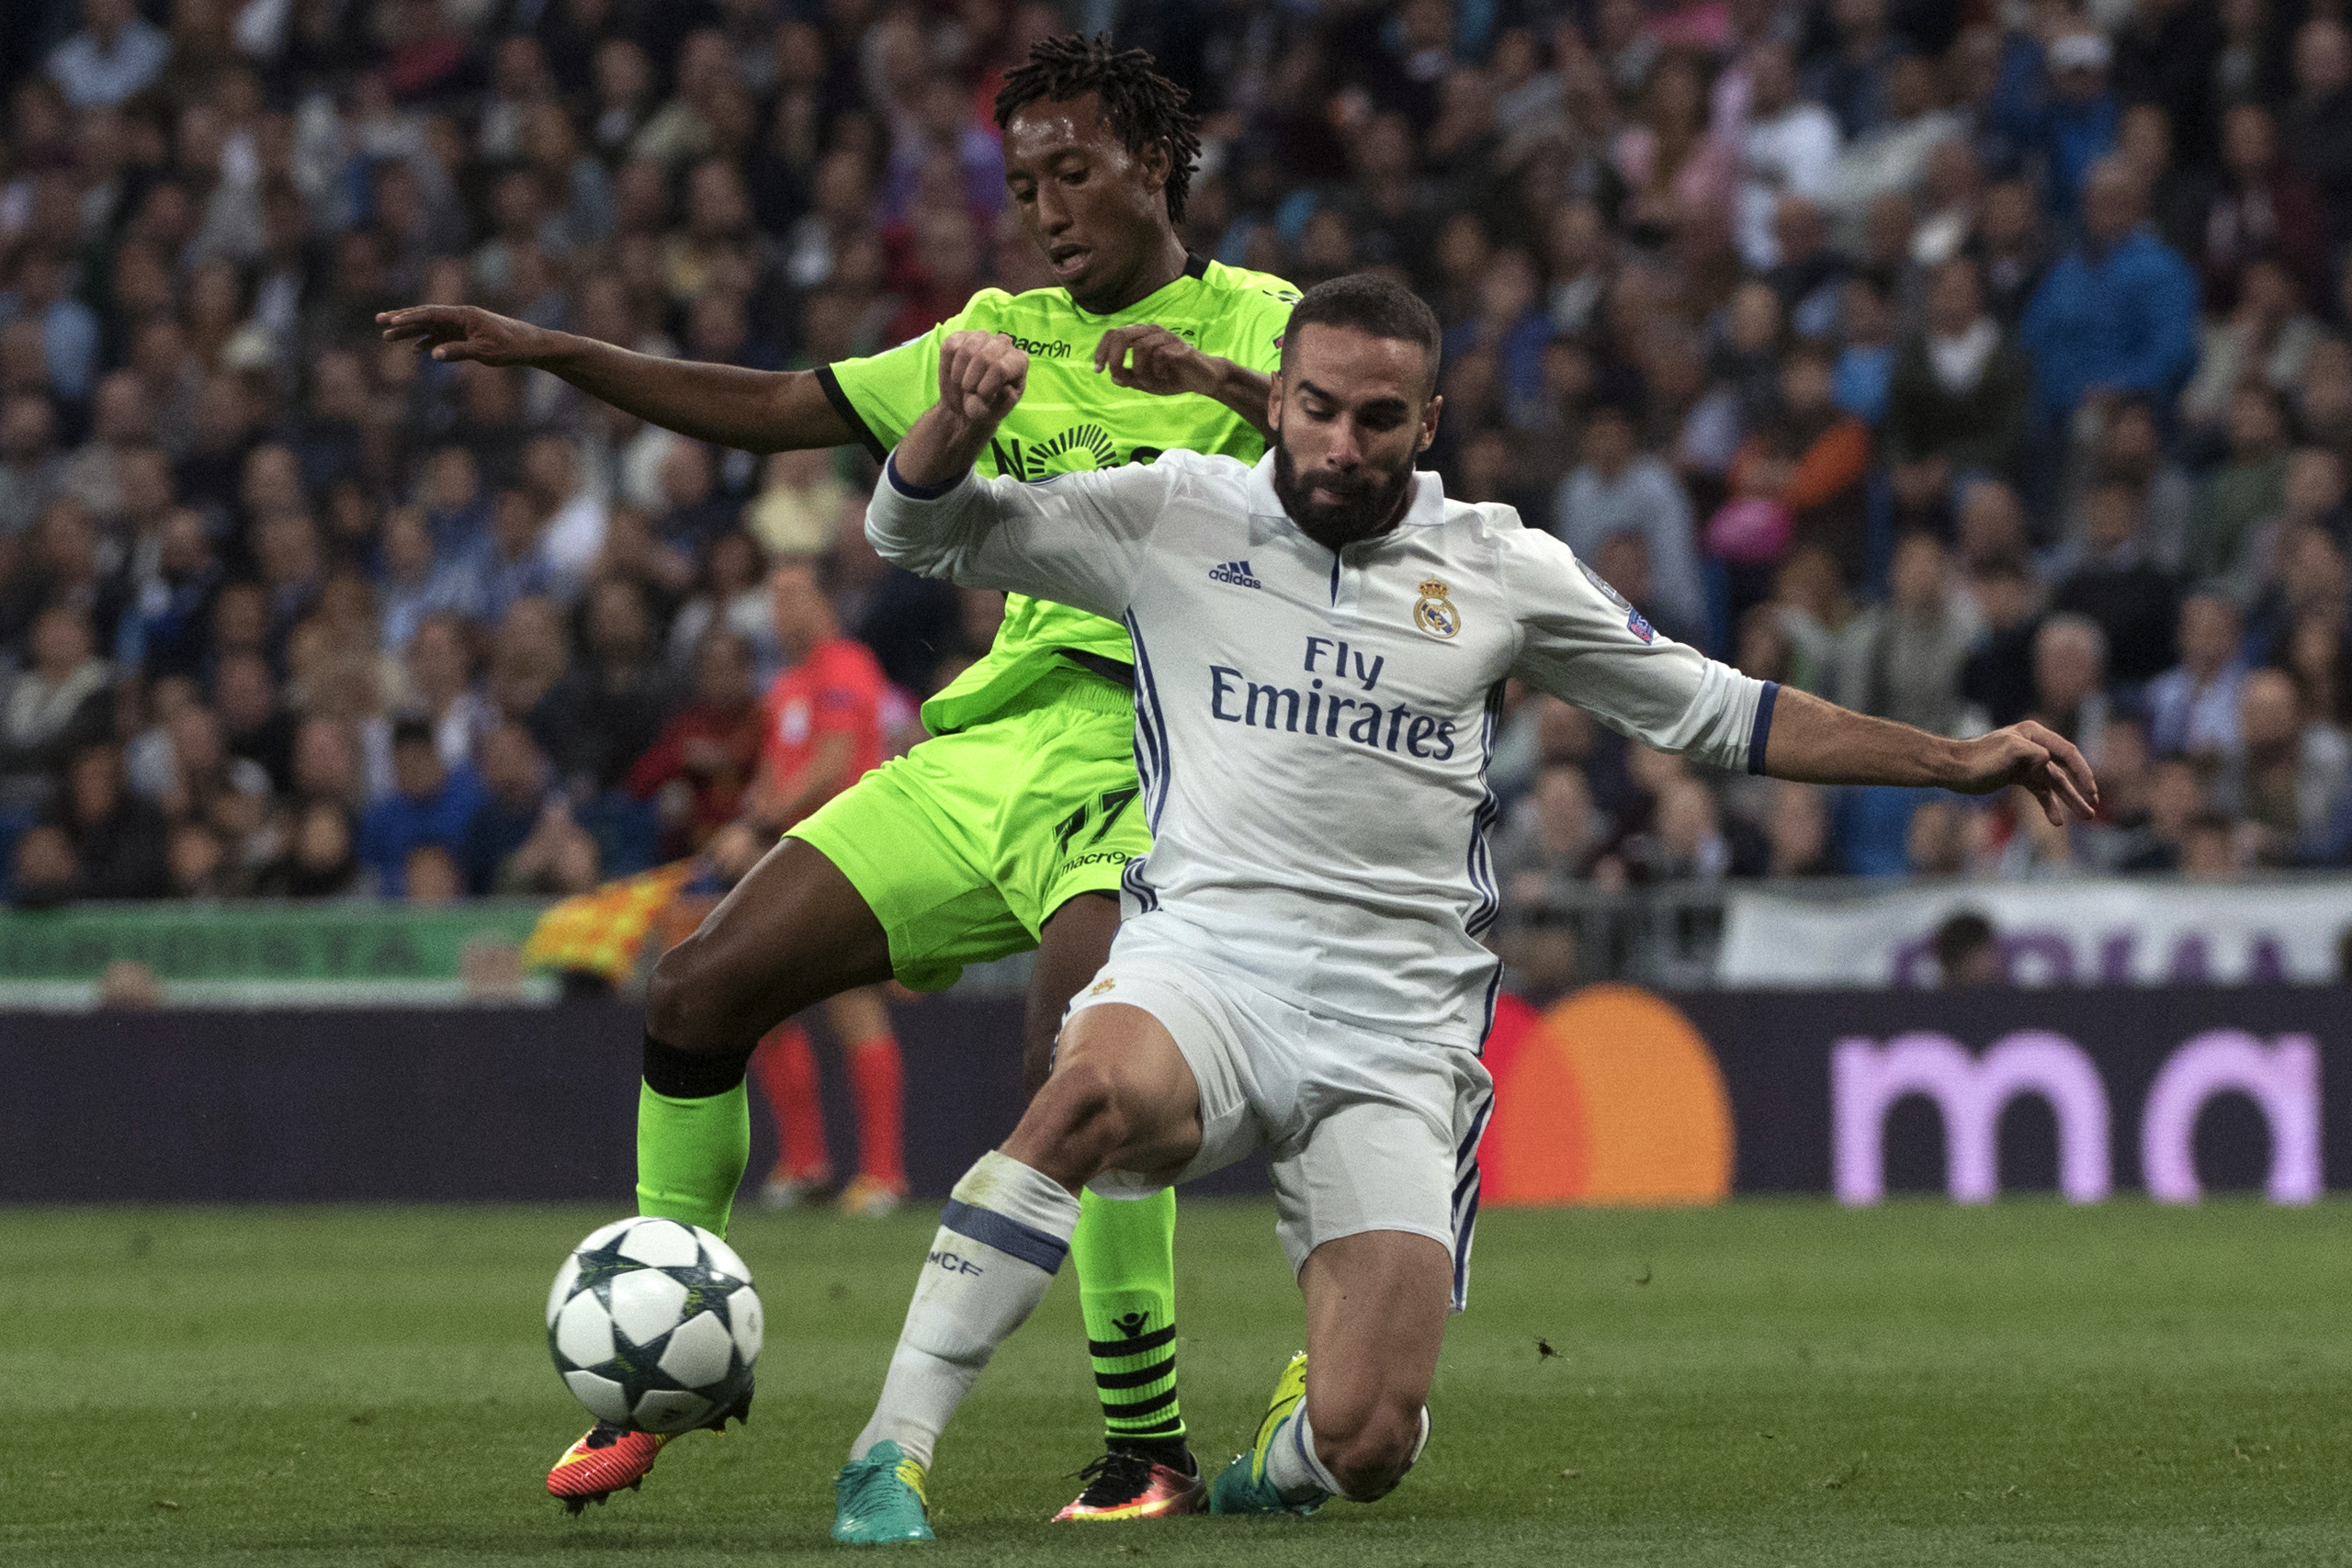 Gelson earned plaudits for his performance against Real Madrid and is now reportedly on the radar of Manchester United and Real Madrid. (Picture Courtesy - AFP/Getty Images)